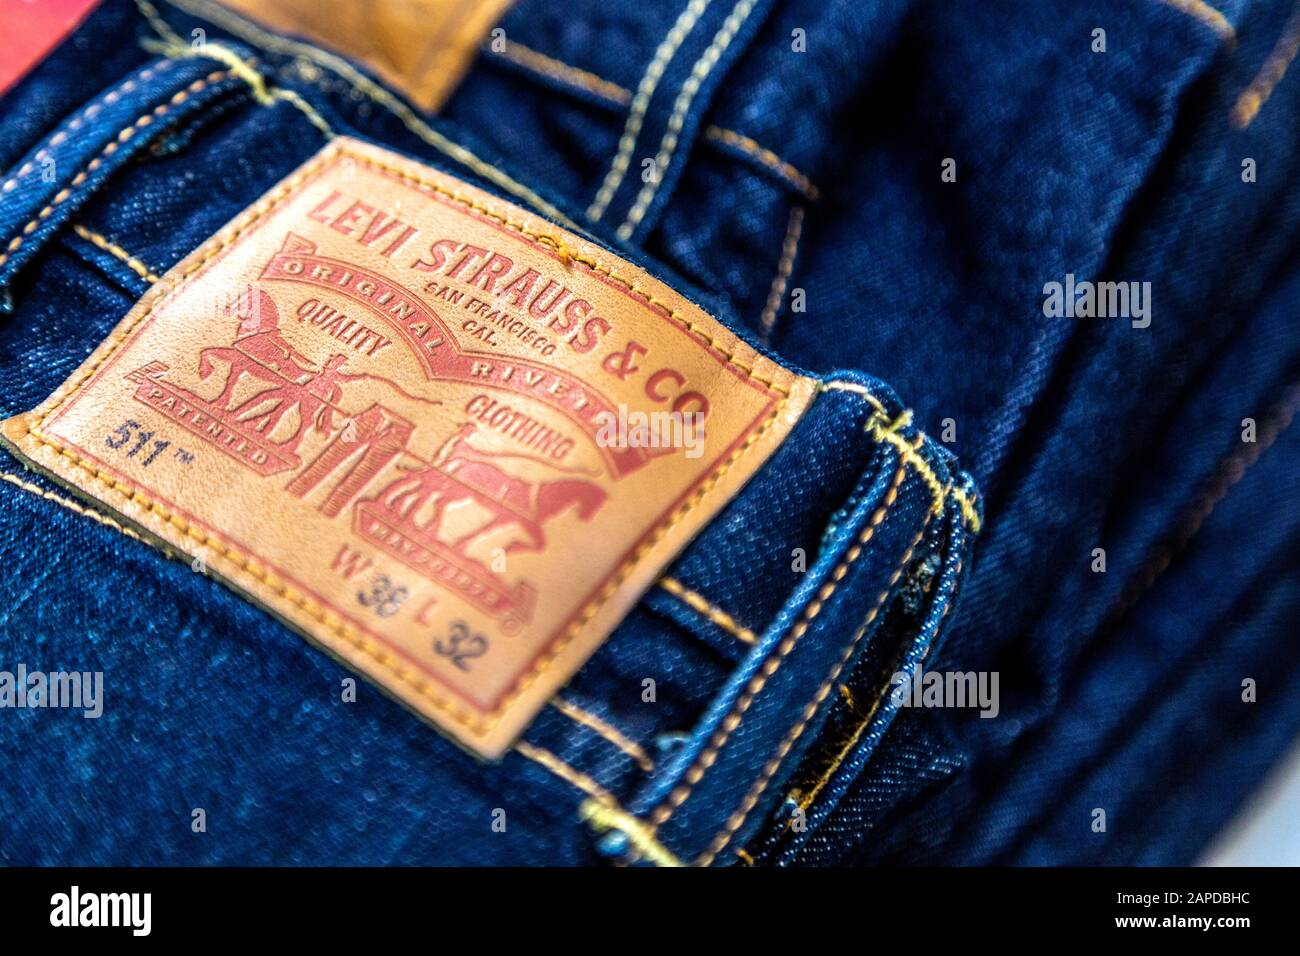 Close-up of the label at the back of Levi's jeans Stock Photo